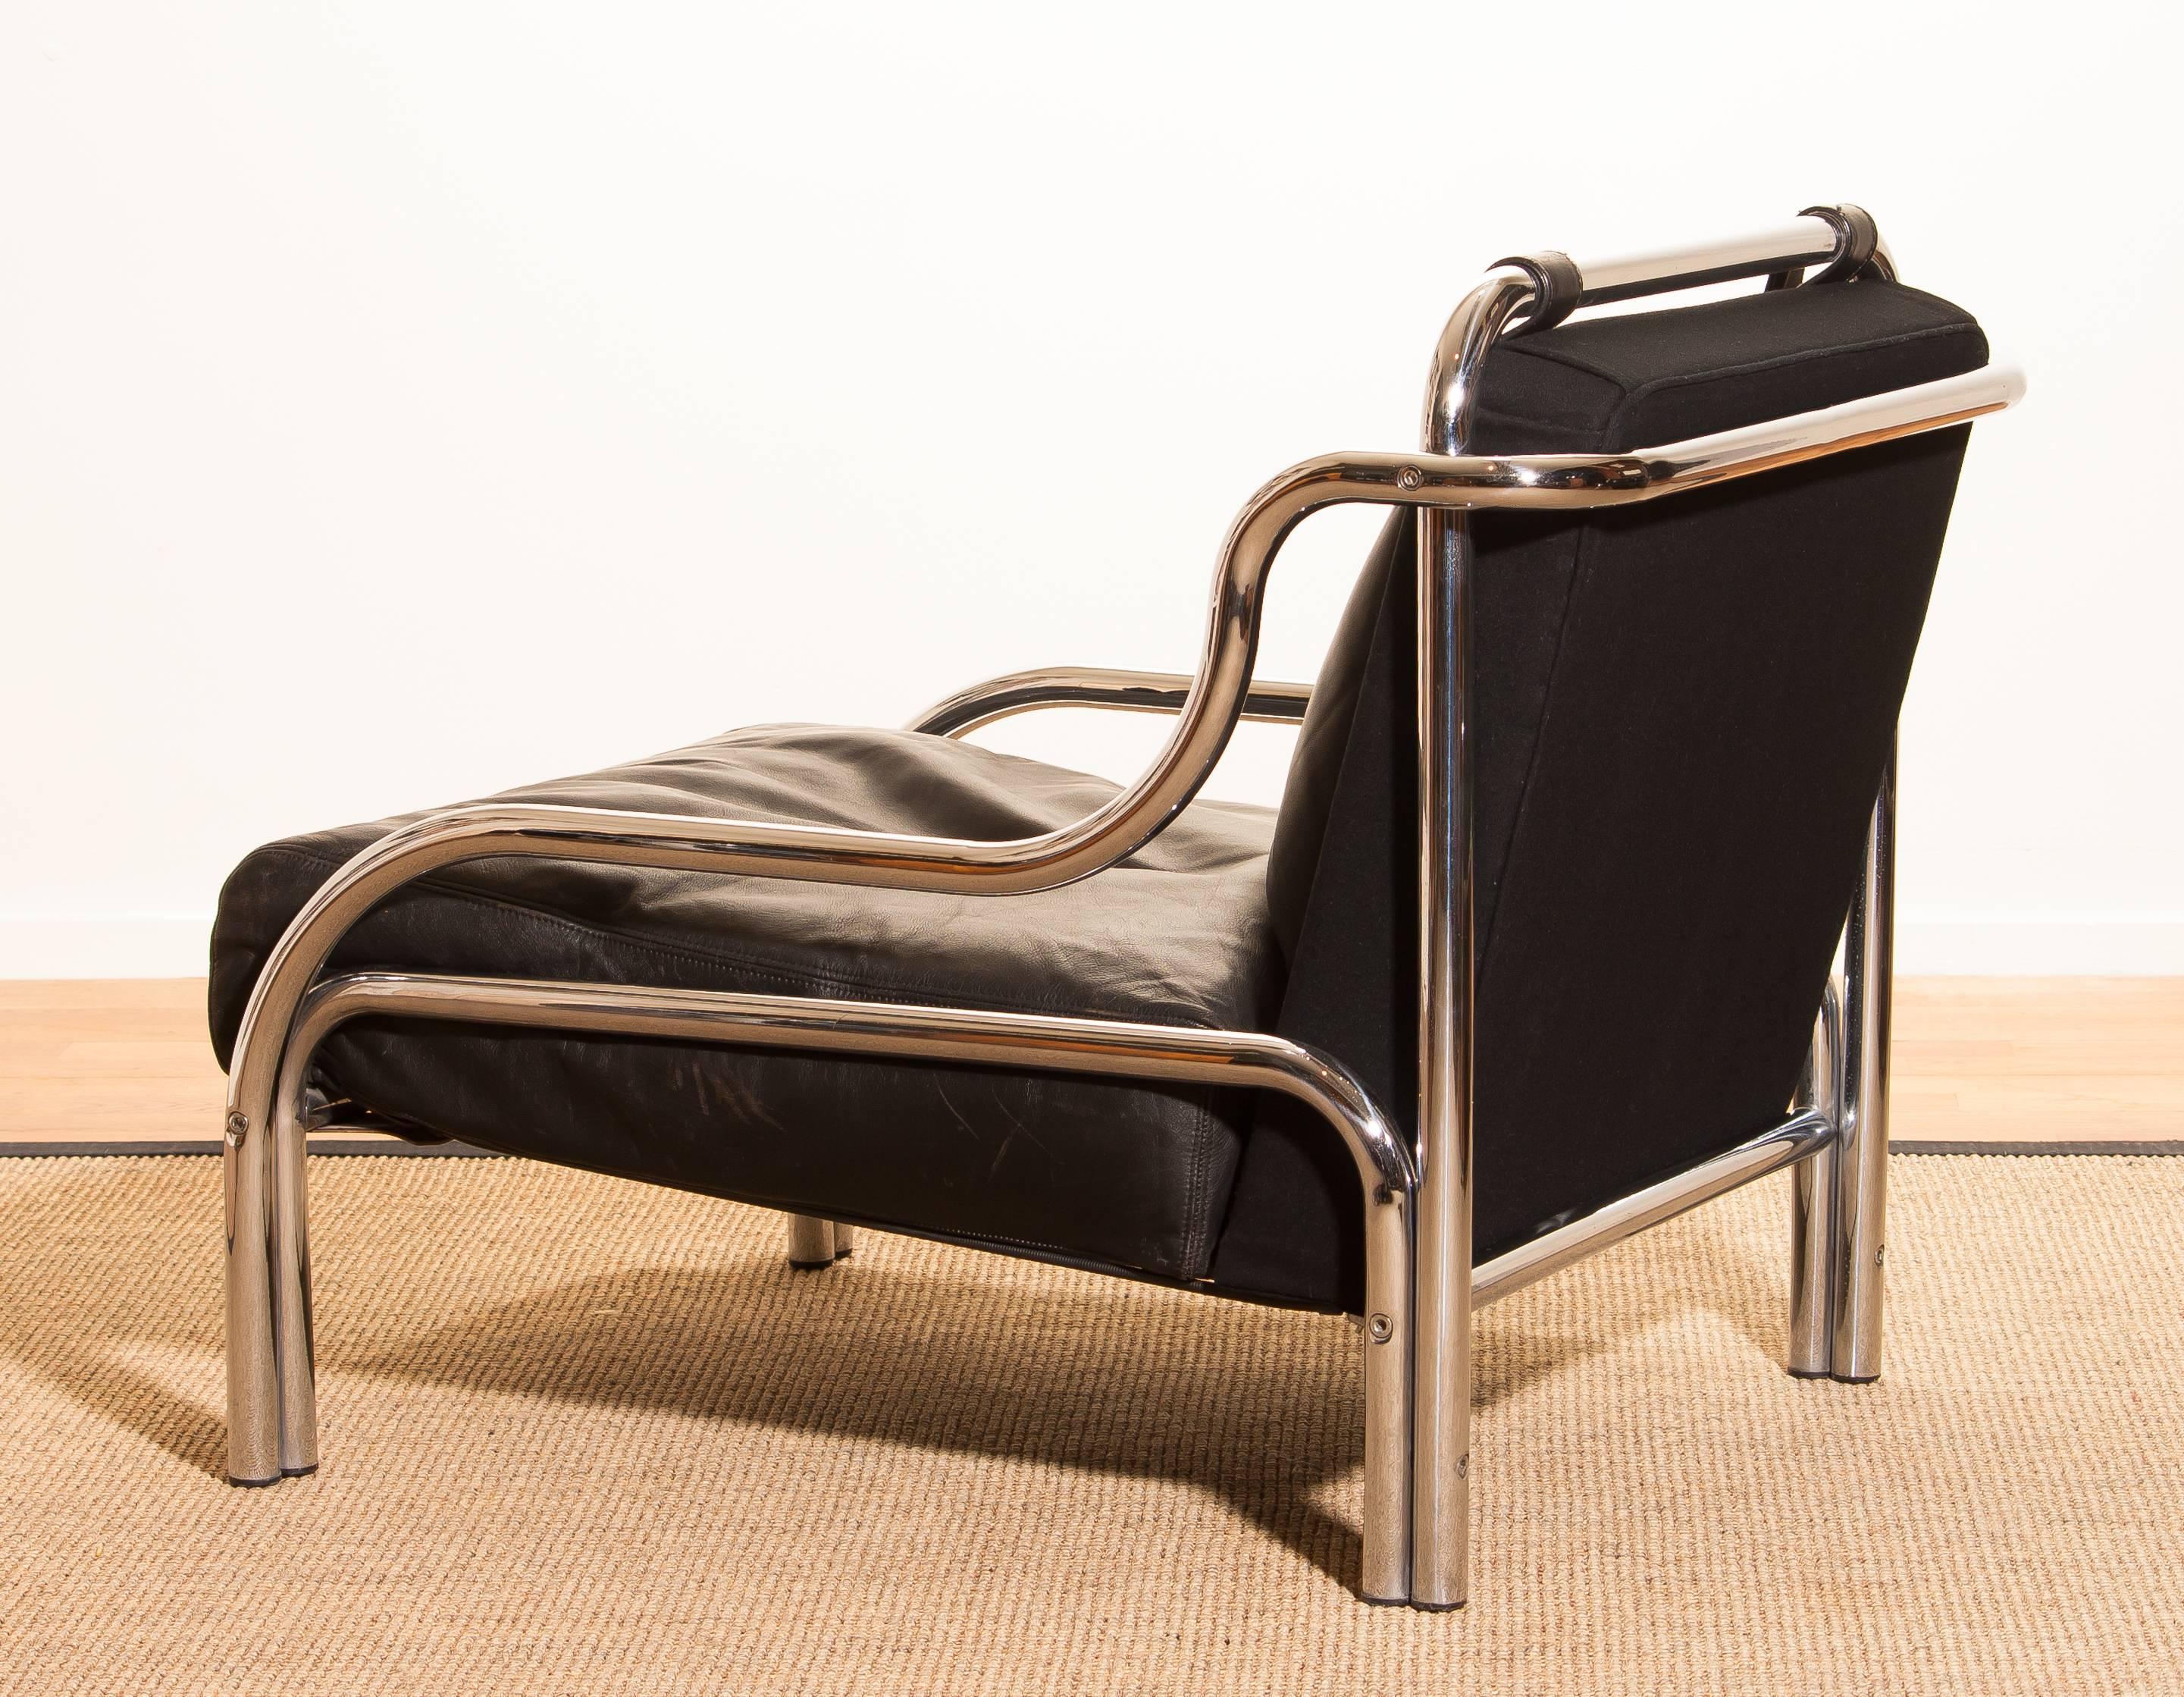 1960s, Leather and Chrome Lounge Chair by Gae Aulenti for Poltronova 3